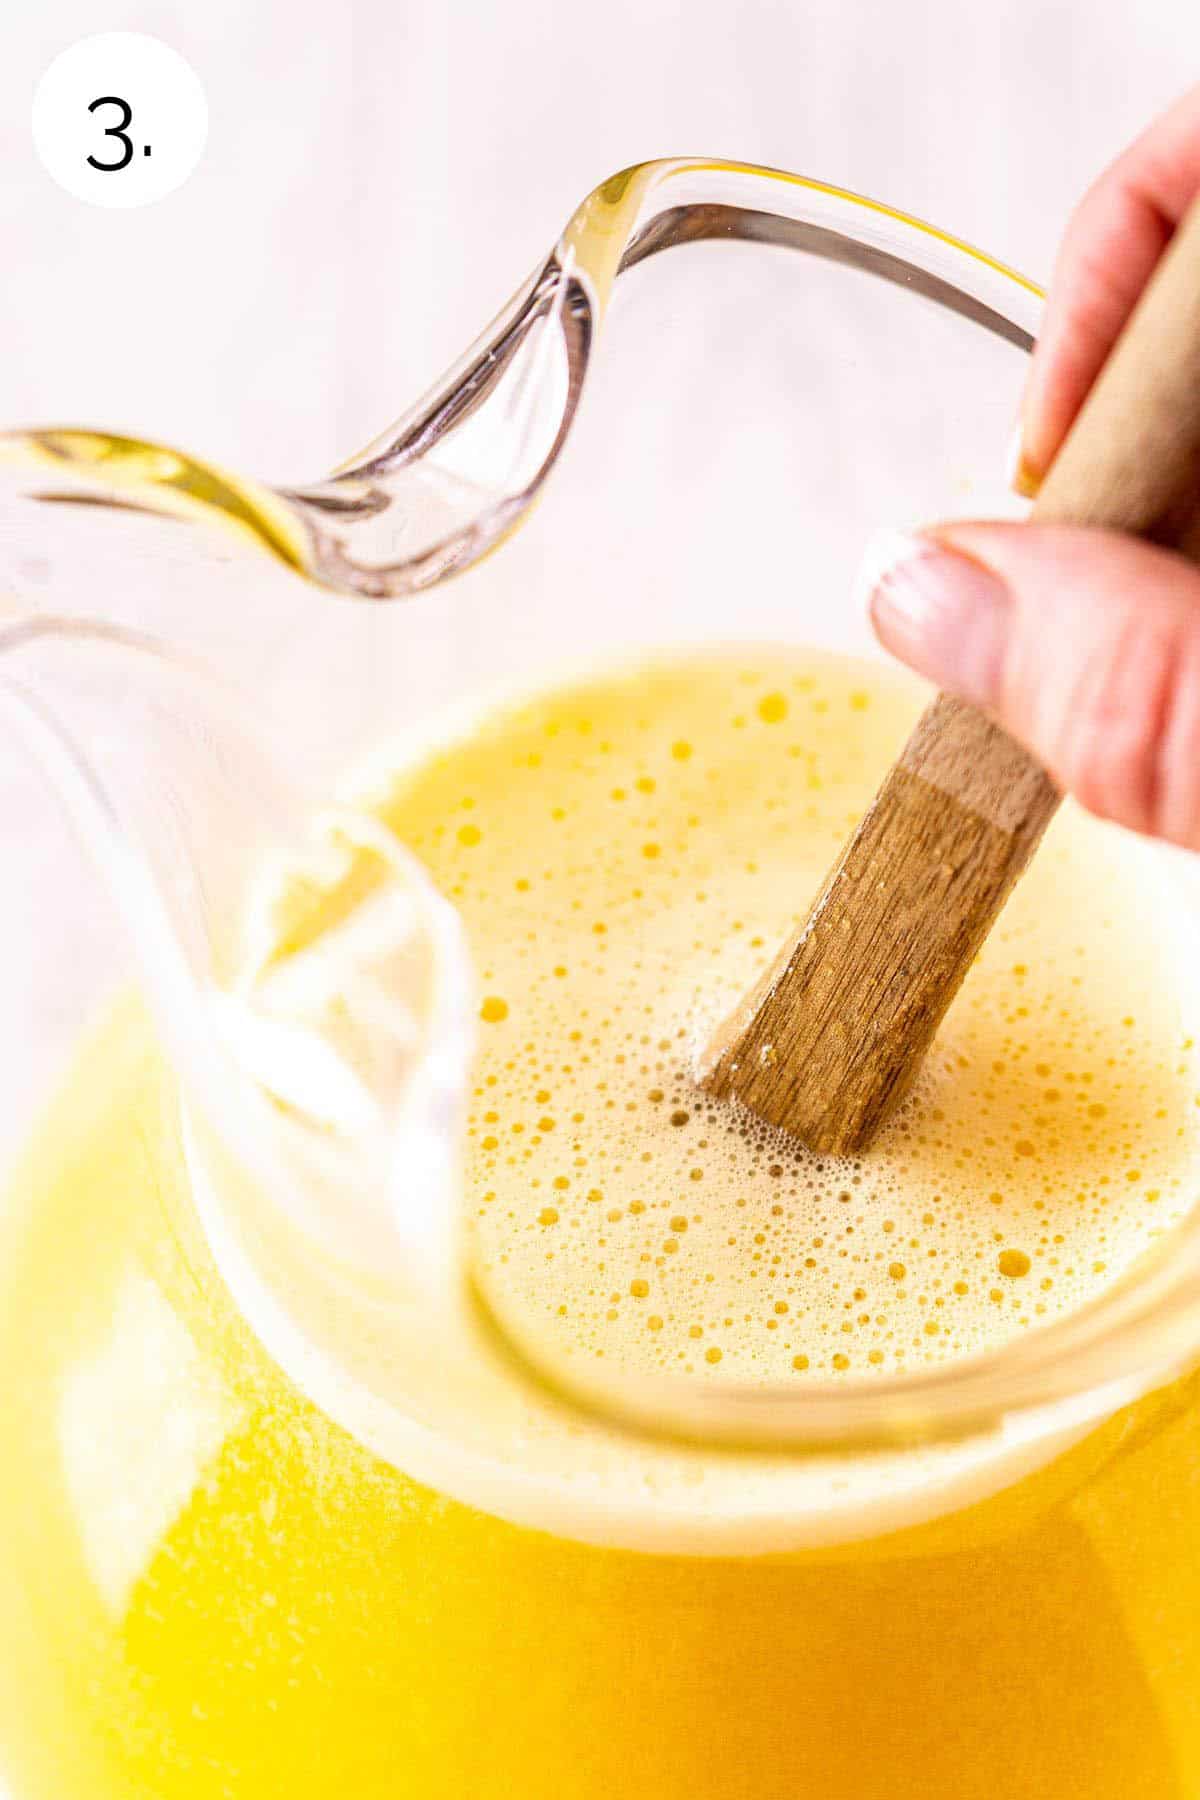 A hand stirring a brown wooden spoon in a glass pitcher to combine the ingredients and make the lemonade.